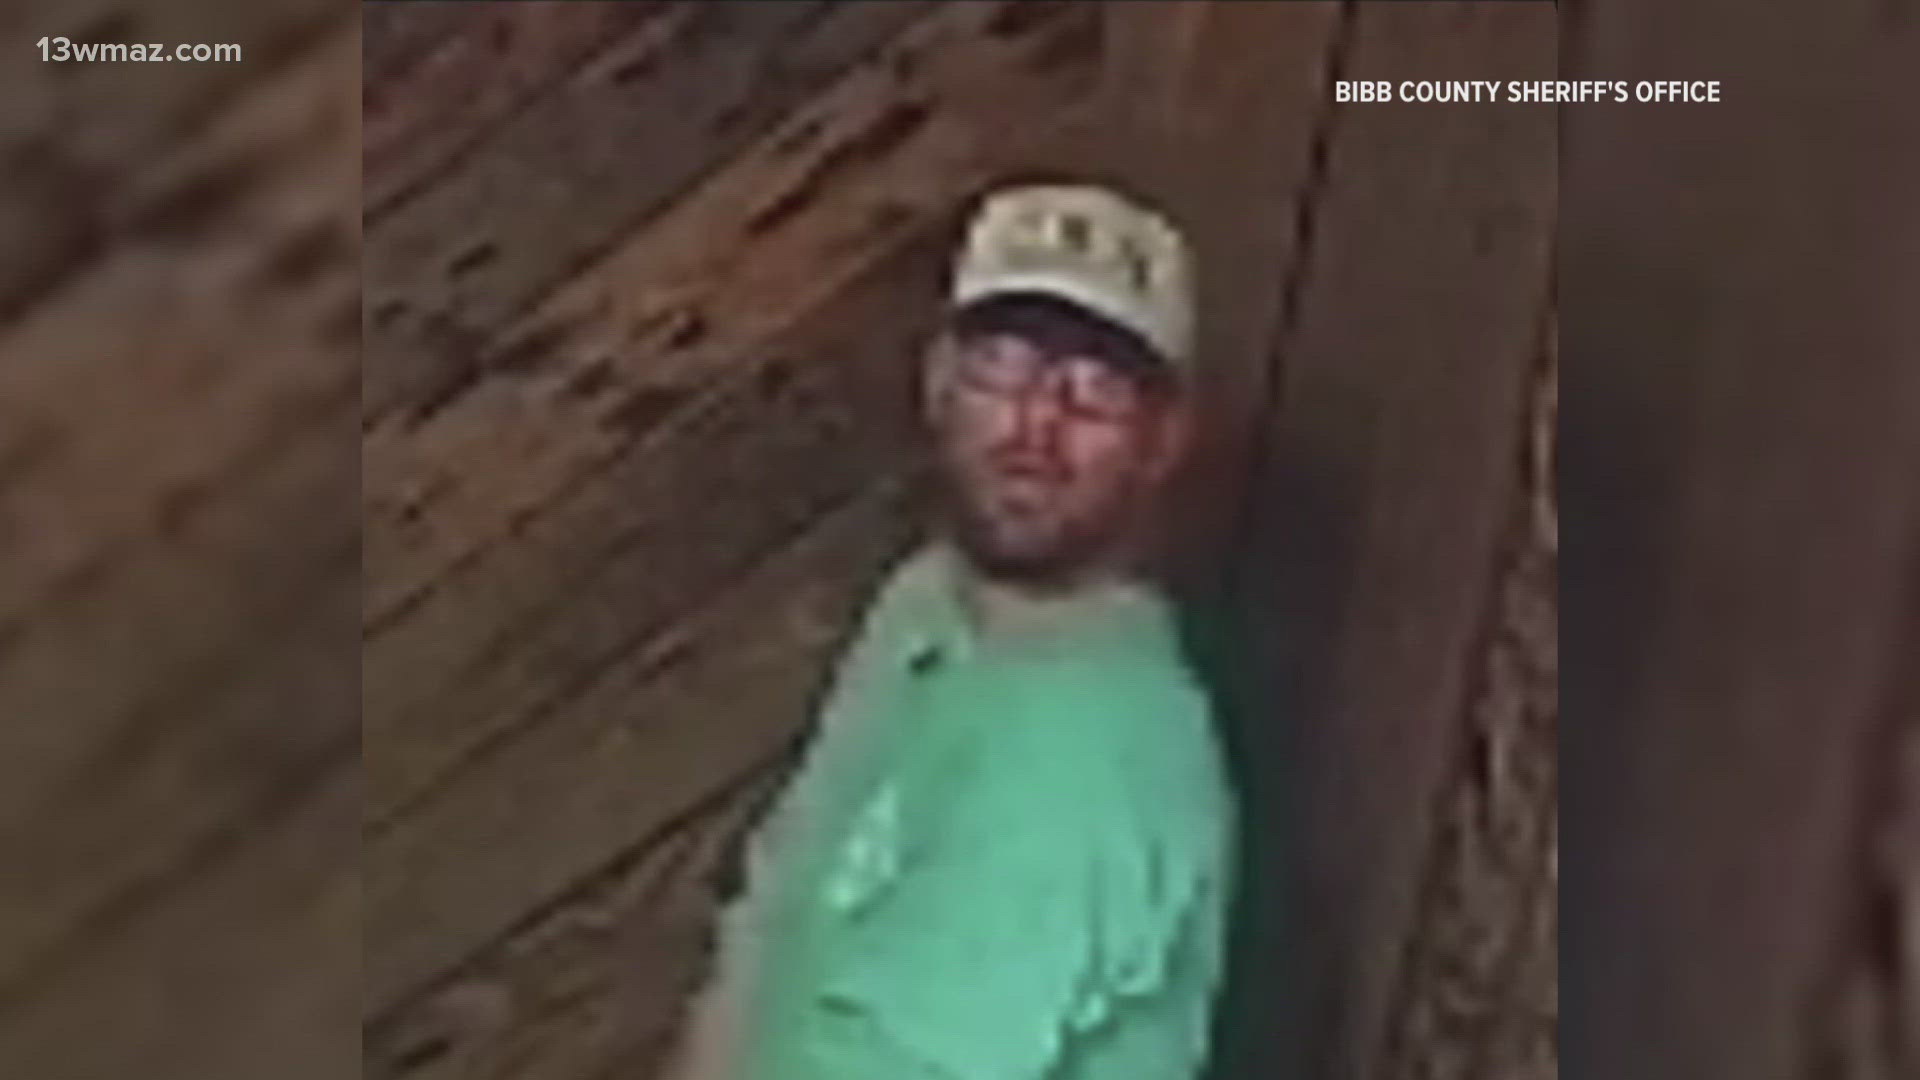 The Bibb County Sheriff's Office released a video of the man they're looking for in connection to the murder.